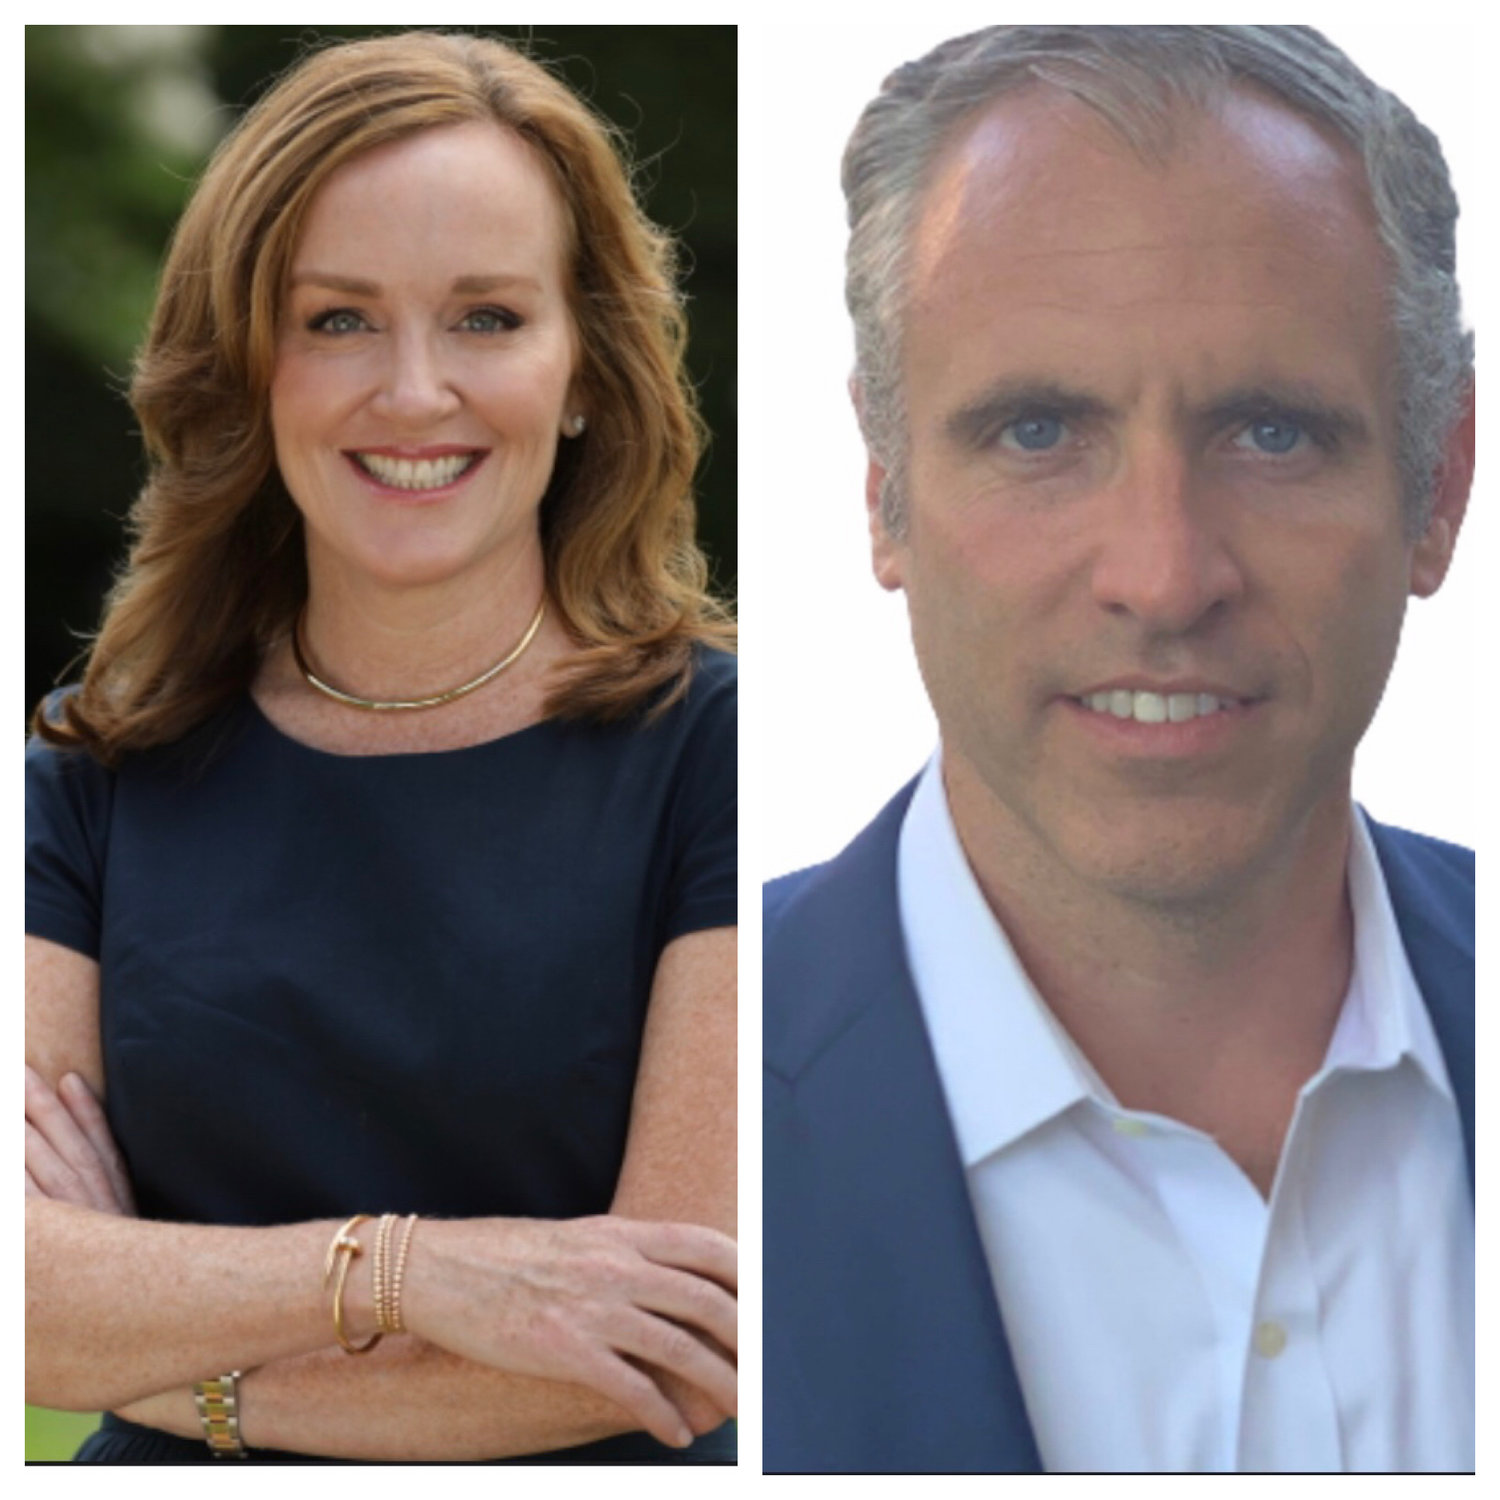 Kathleen Rice and Douglas Tuman are vying in the Fourth Congressional District.